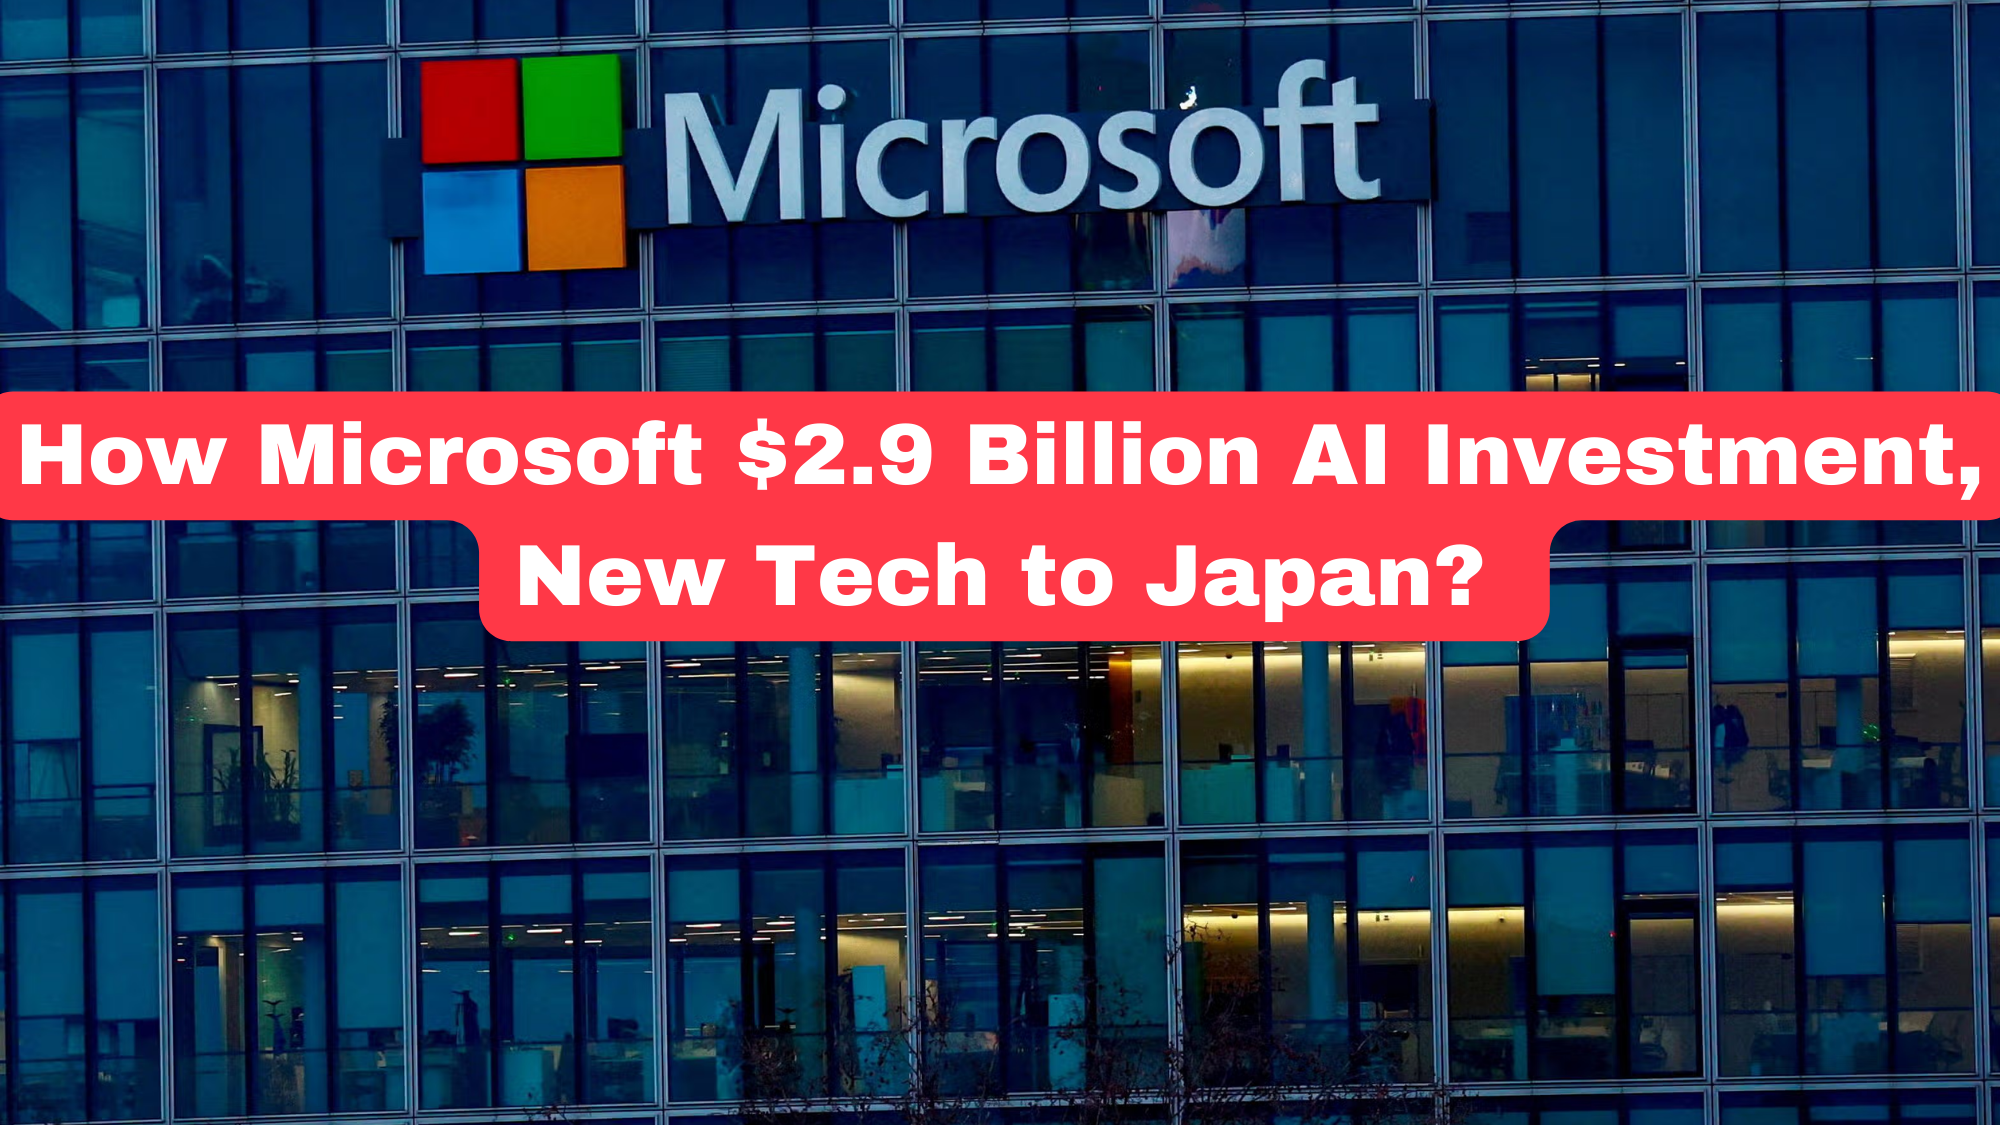 How Microsoft $2.9 Billion AI Investment, New Tech to Japan?